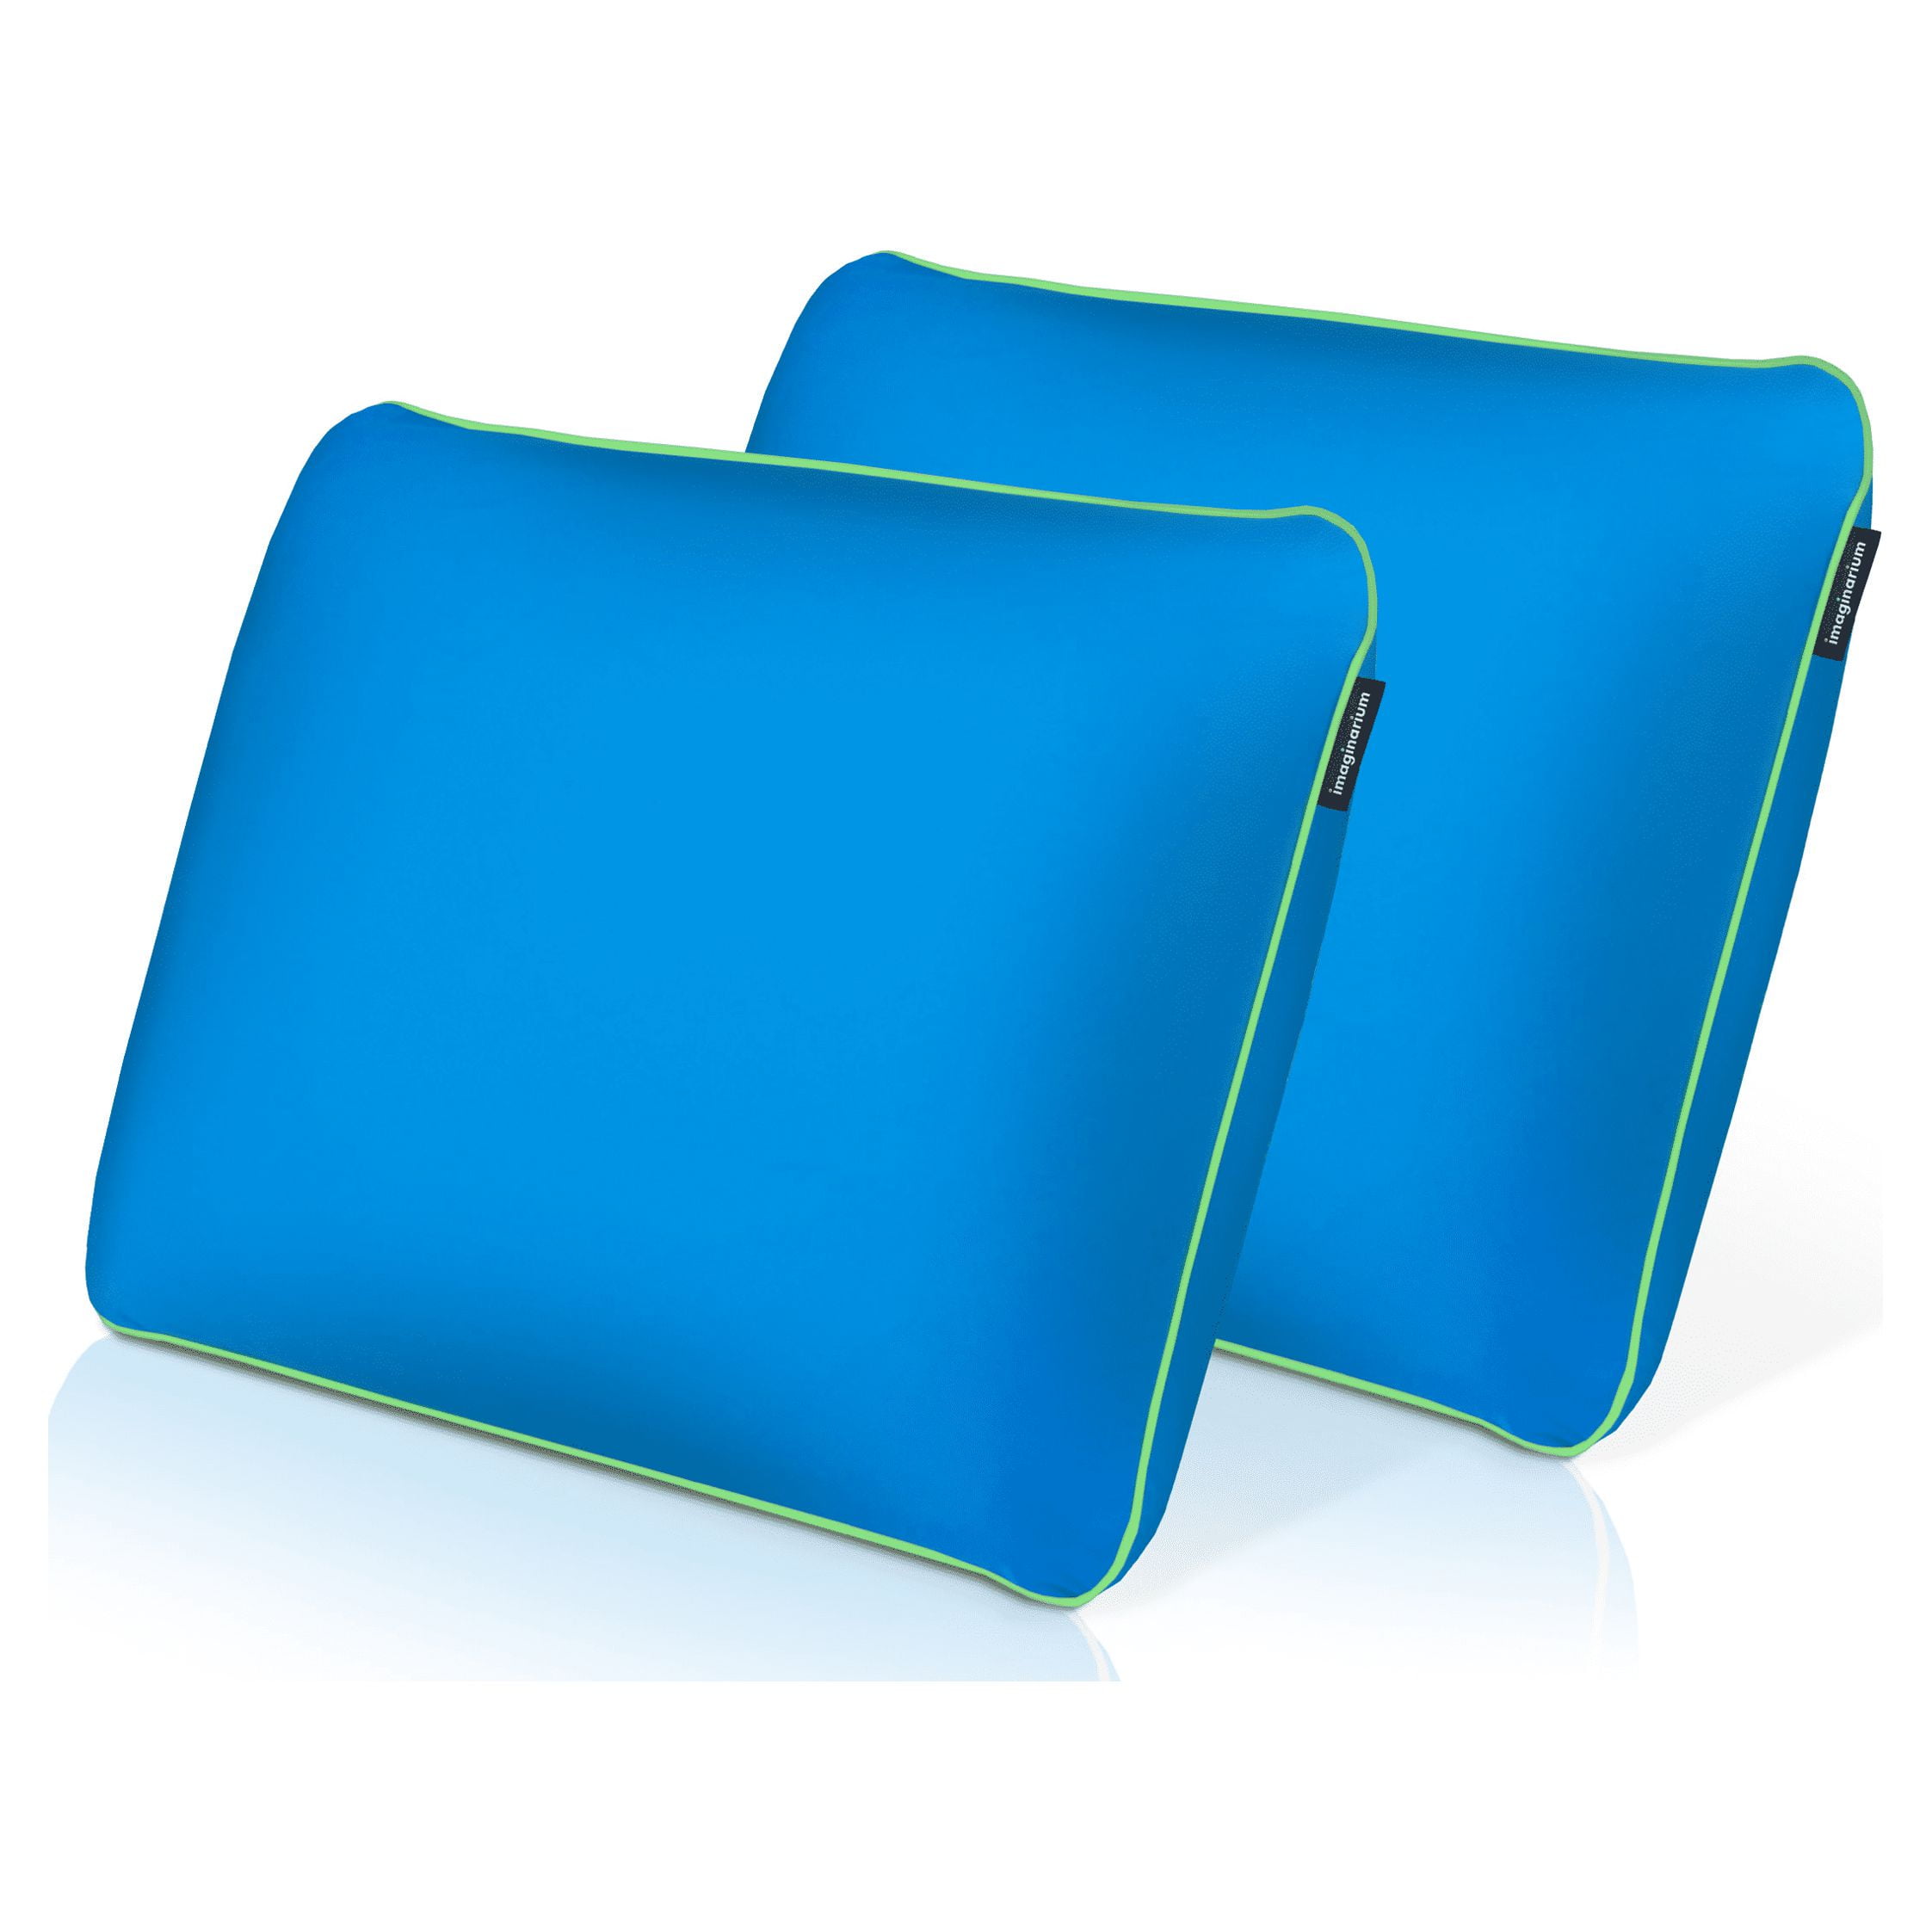 Memory Foam Fun Pillow with Cool-to-the-Touch Cover, Standard/Queen, Cosmic  Blue, 2 Pack 